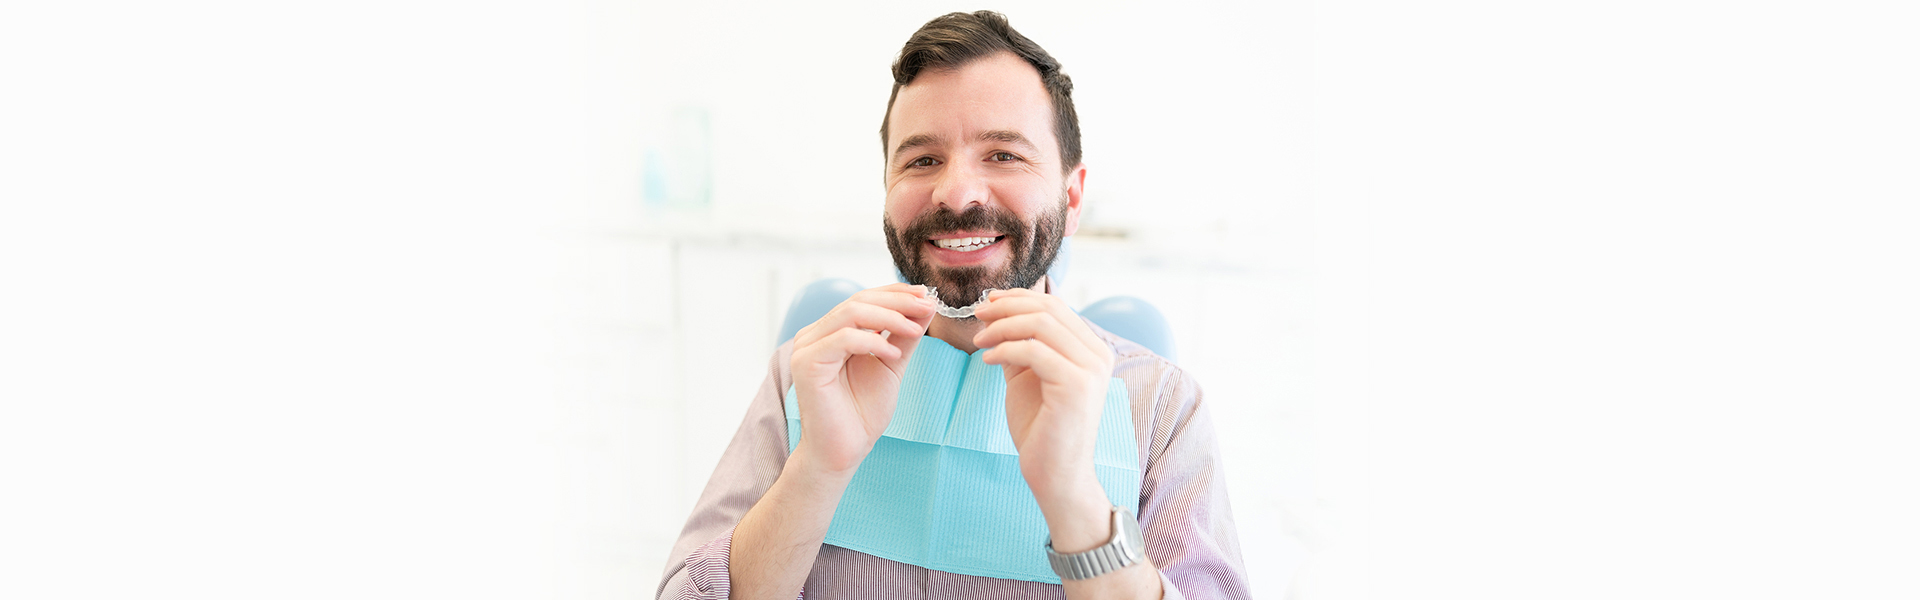 Invisalign Can Help Improve Your Oral Health and Quality of Life